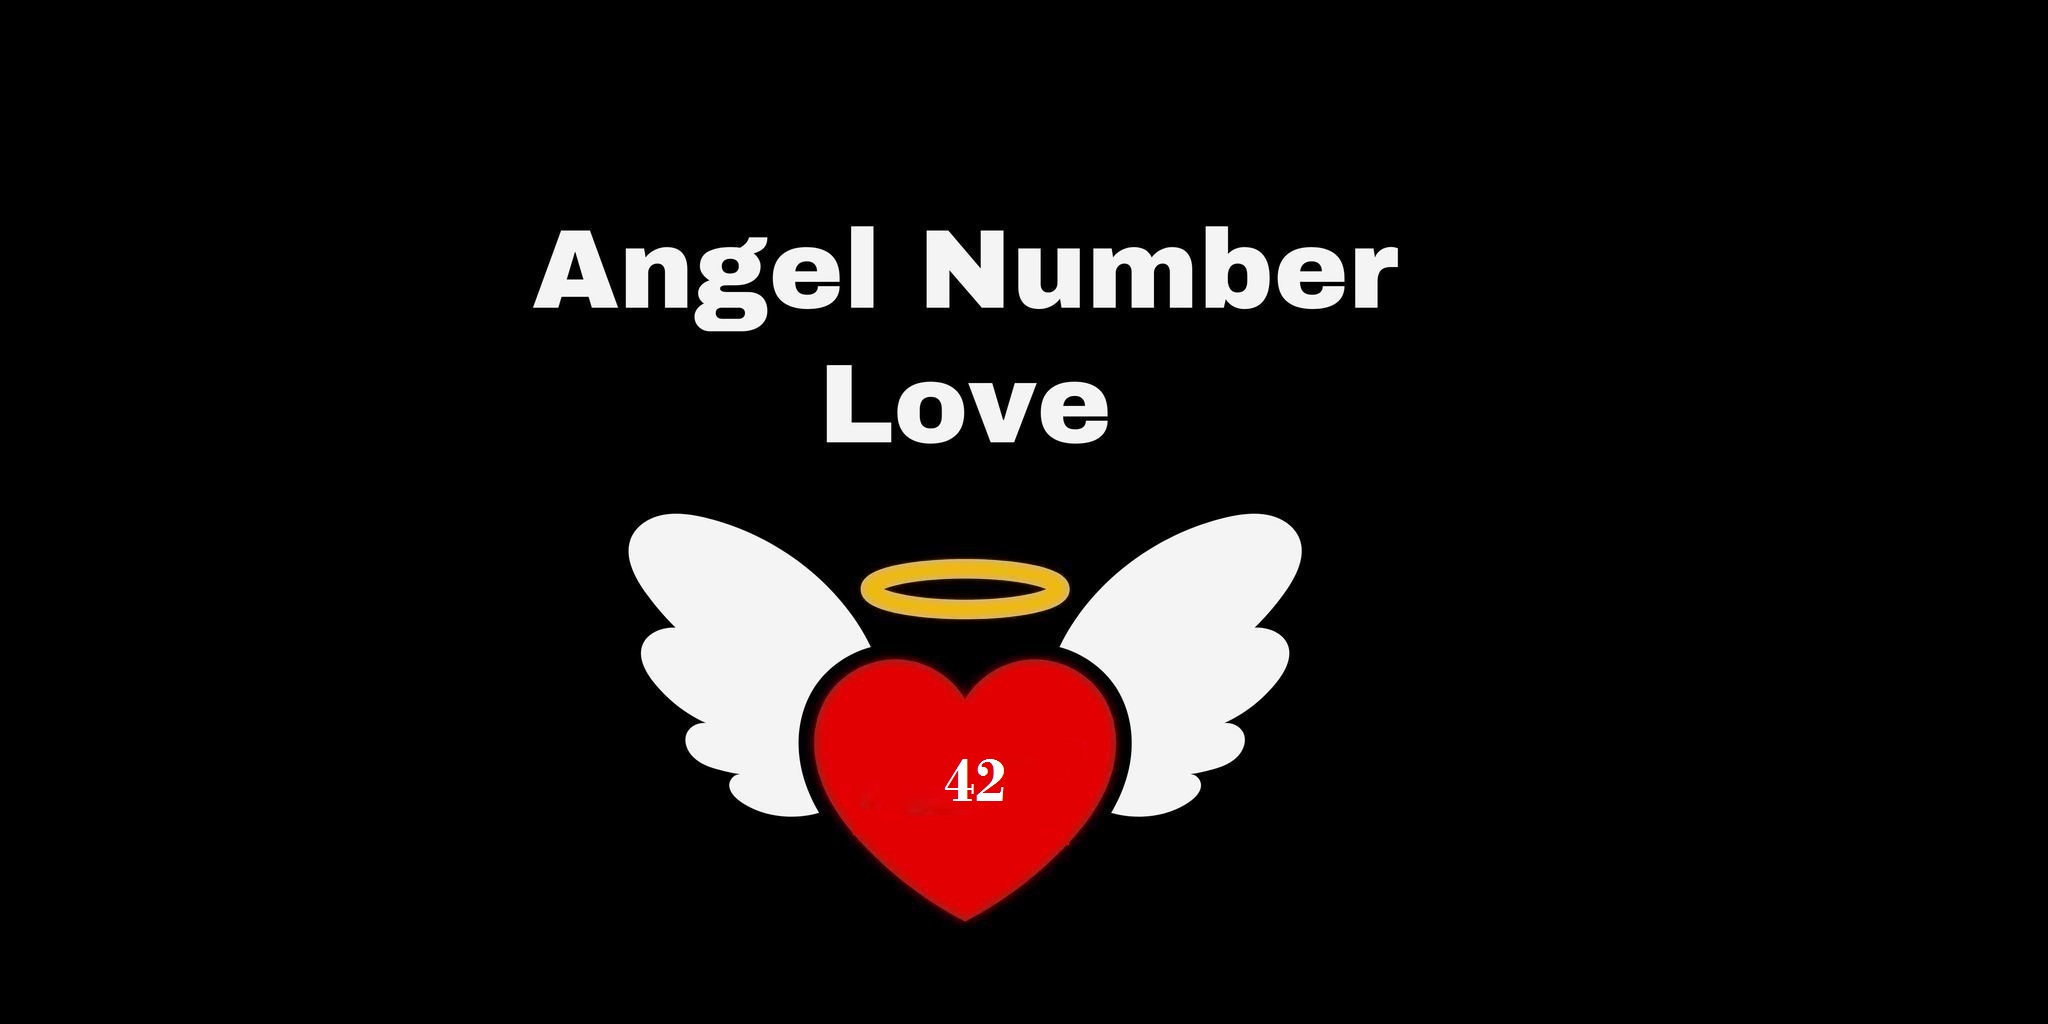 42 Angel Number Meaning In Love